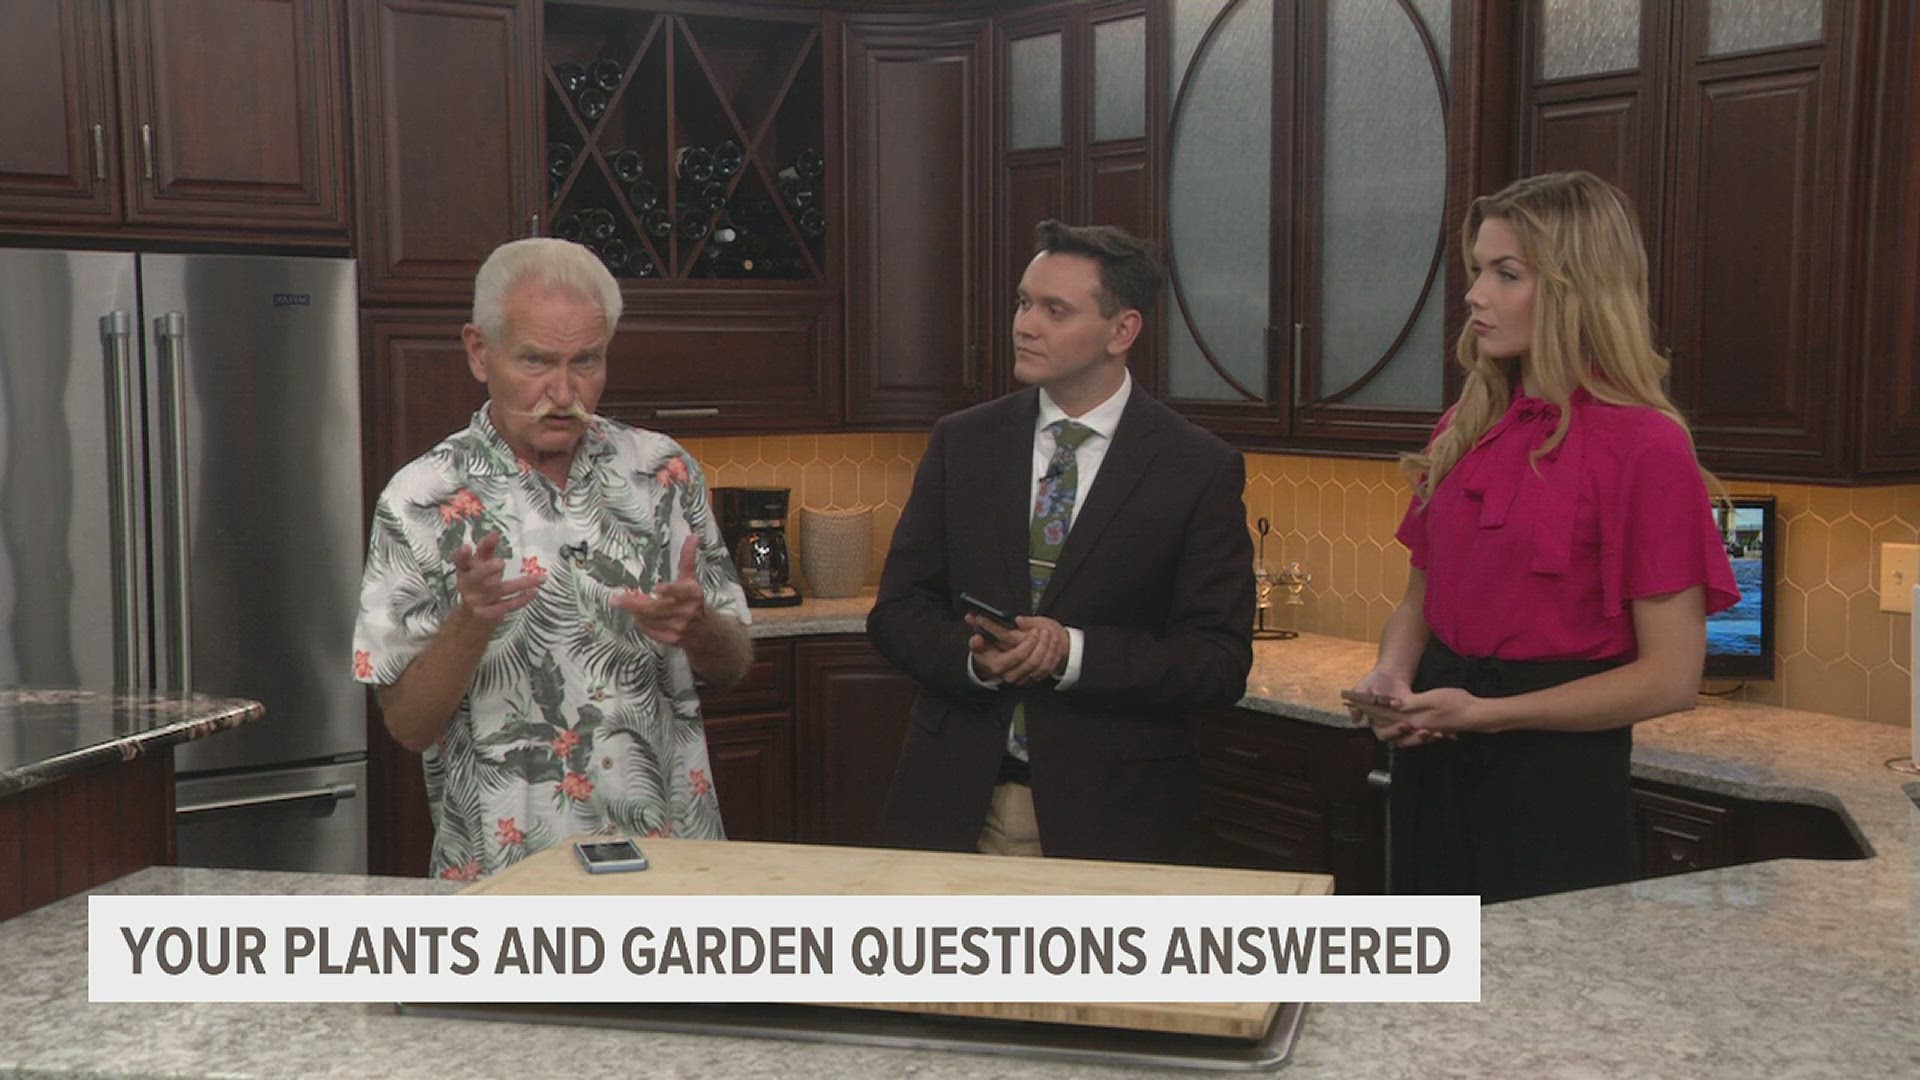 News 8's plants and gardens expert Craig Hignight answers your questions on Facebook Live.